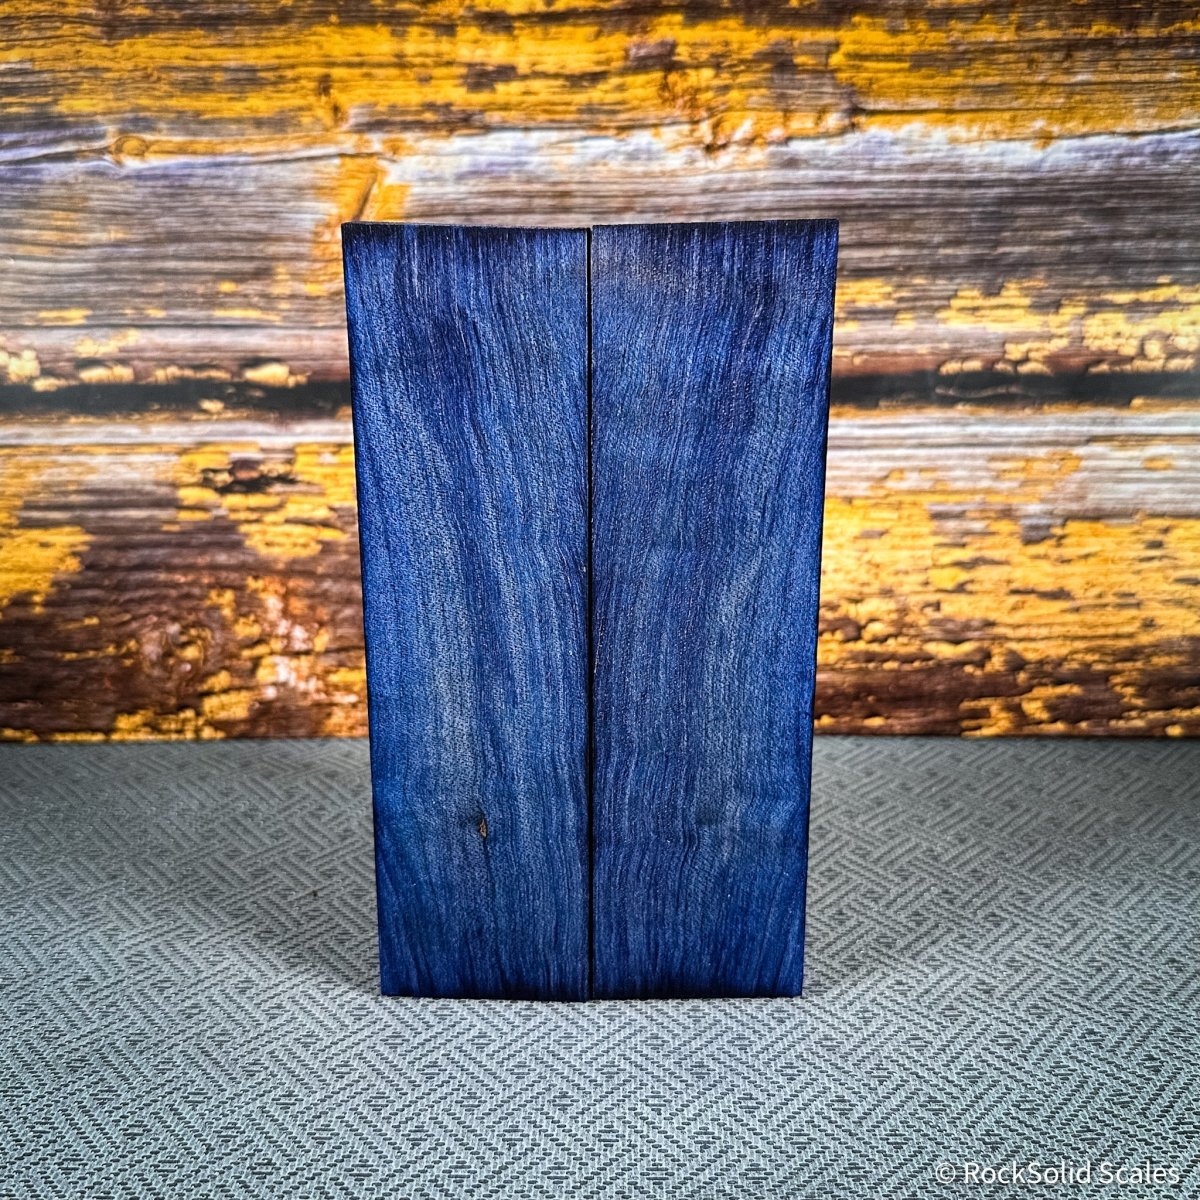 #2433 - Blue Maple - RockSolid Scales -